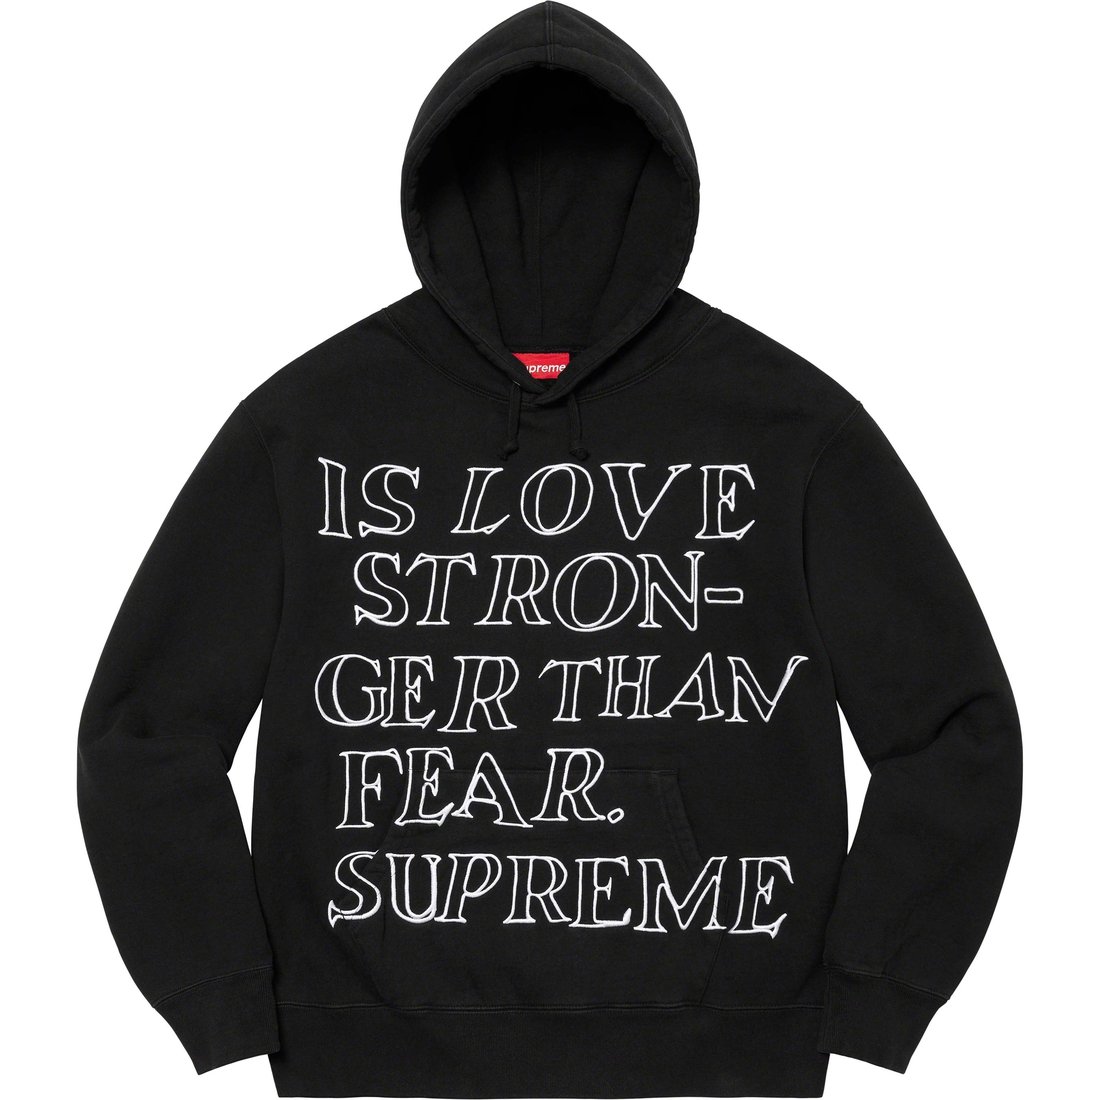 M 23ss Supreme Stronger Than Fear Hooded